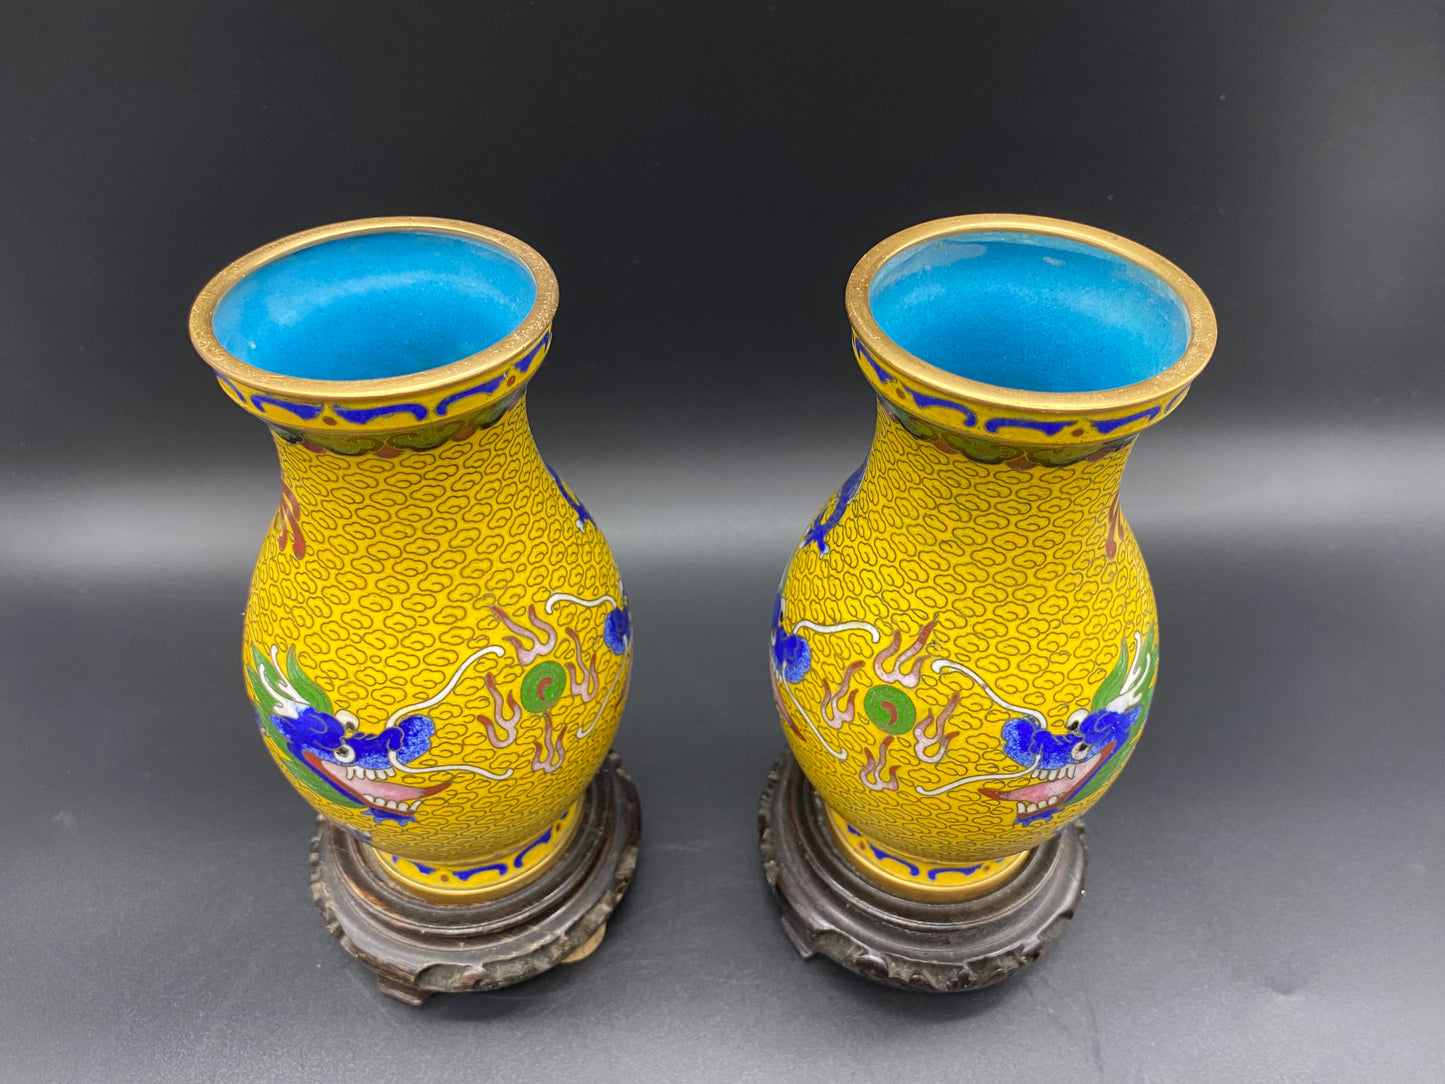 Cloisonné objects were intended primarily for the furnishing of temples and palaces, because their flamboyant splendor was considered appropriate to the function of these structures